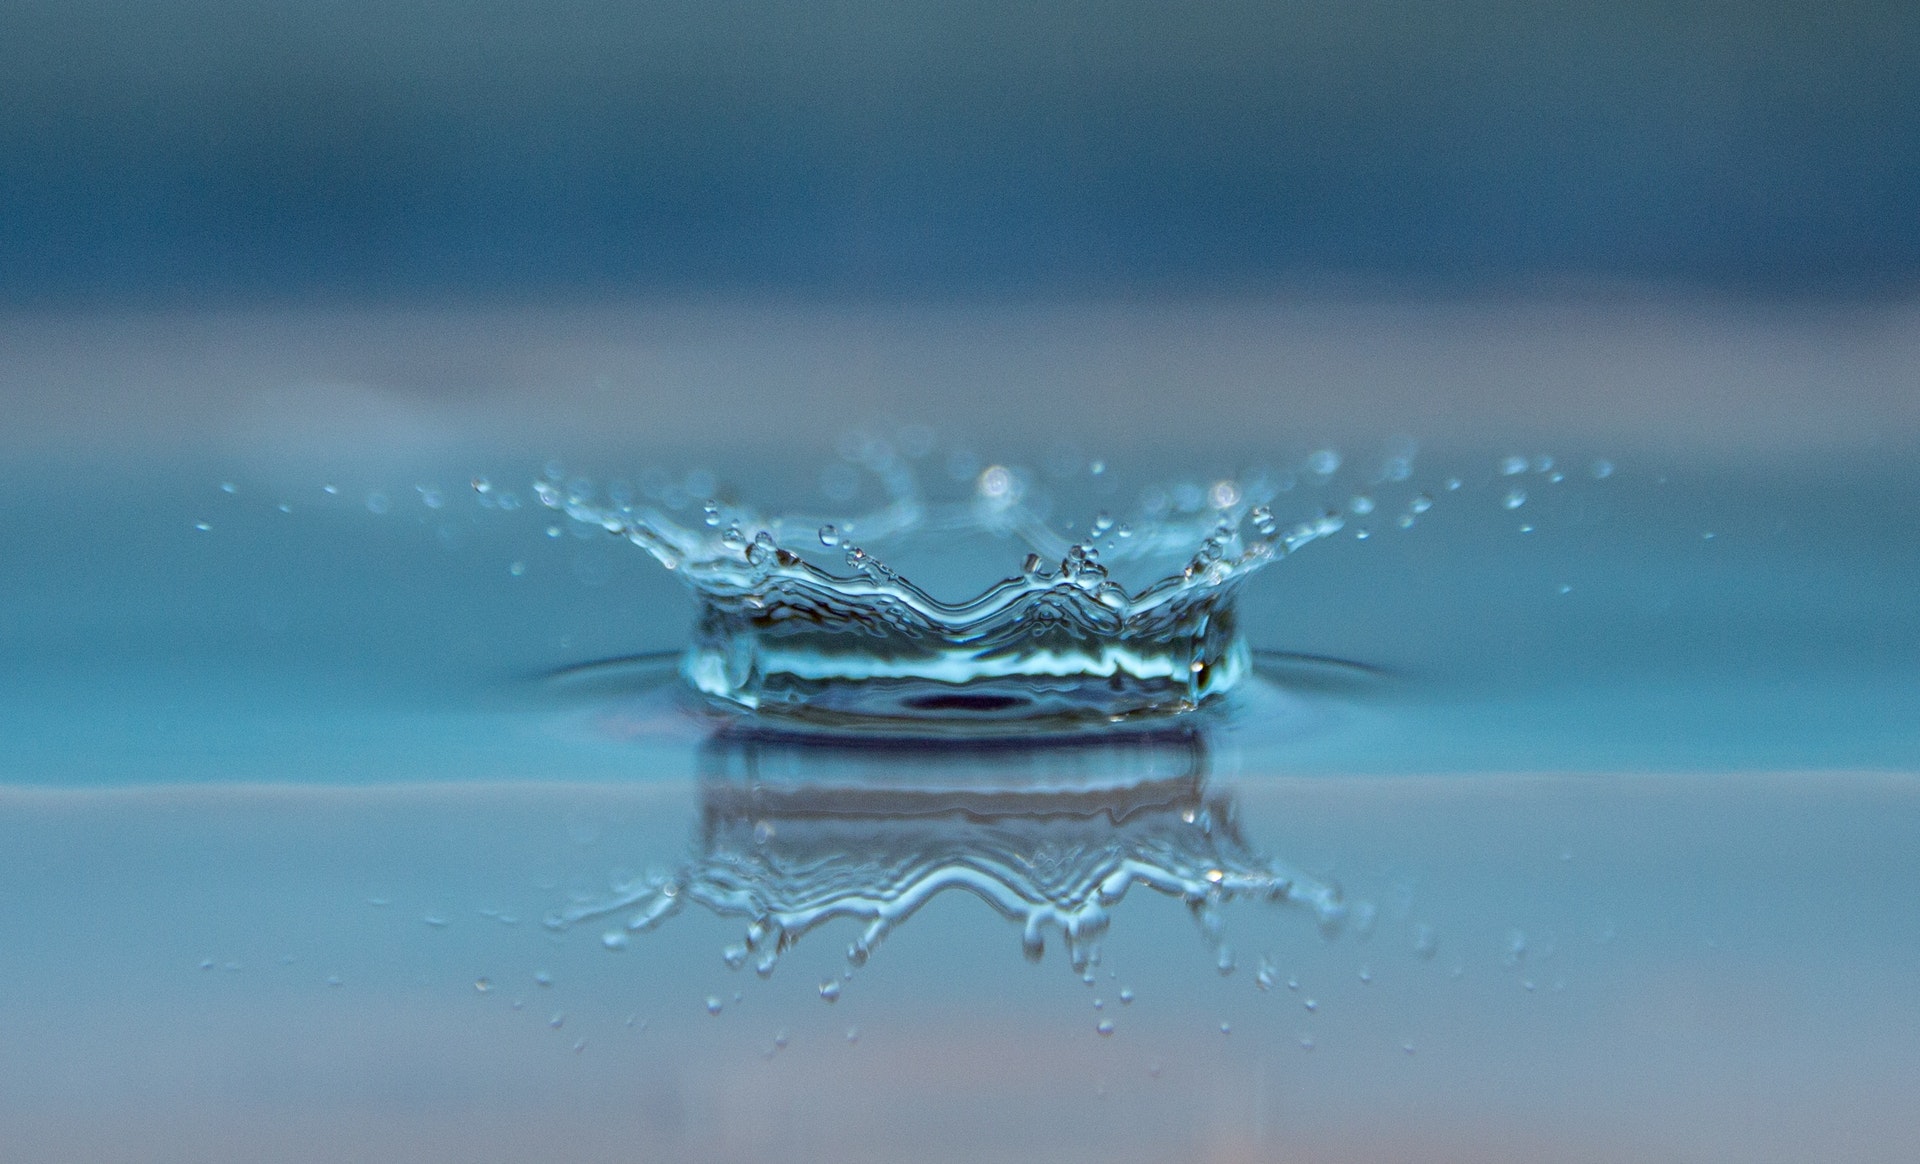 A droplet from a body of water